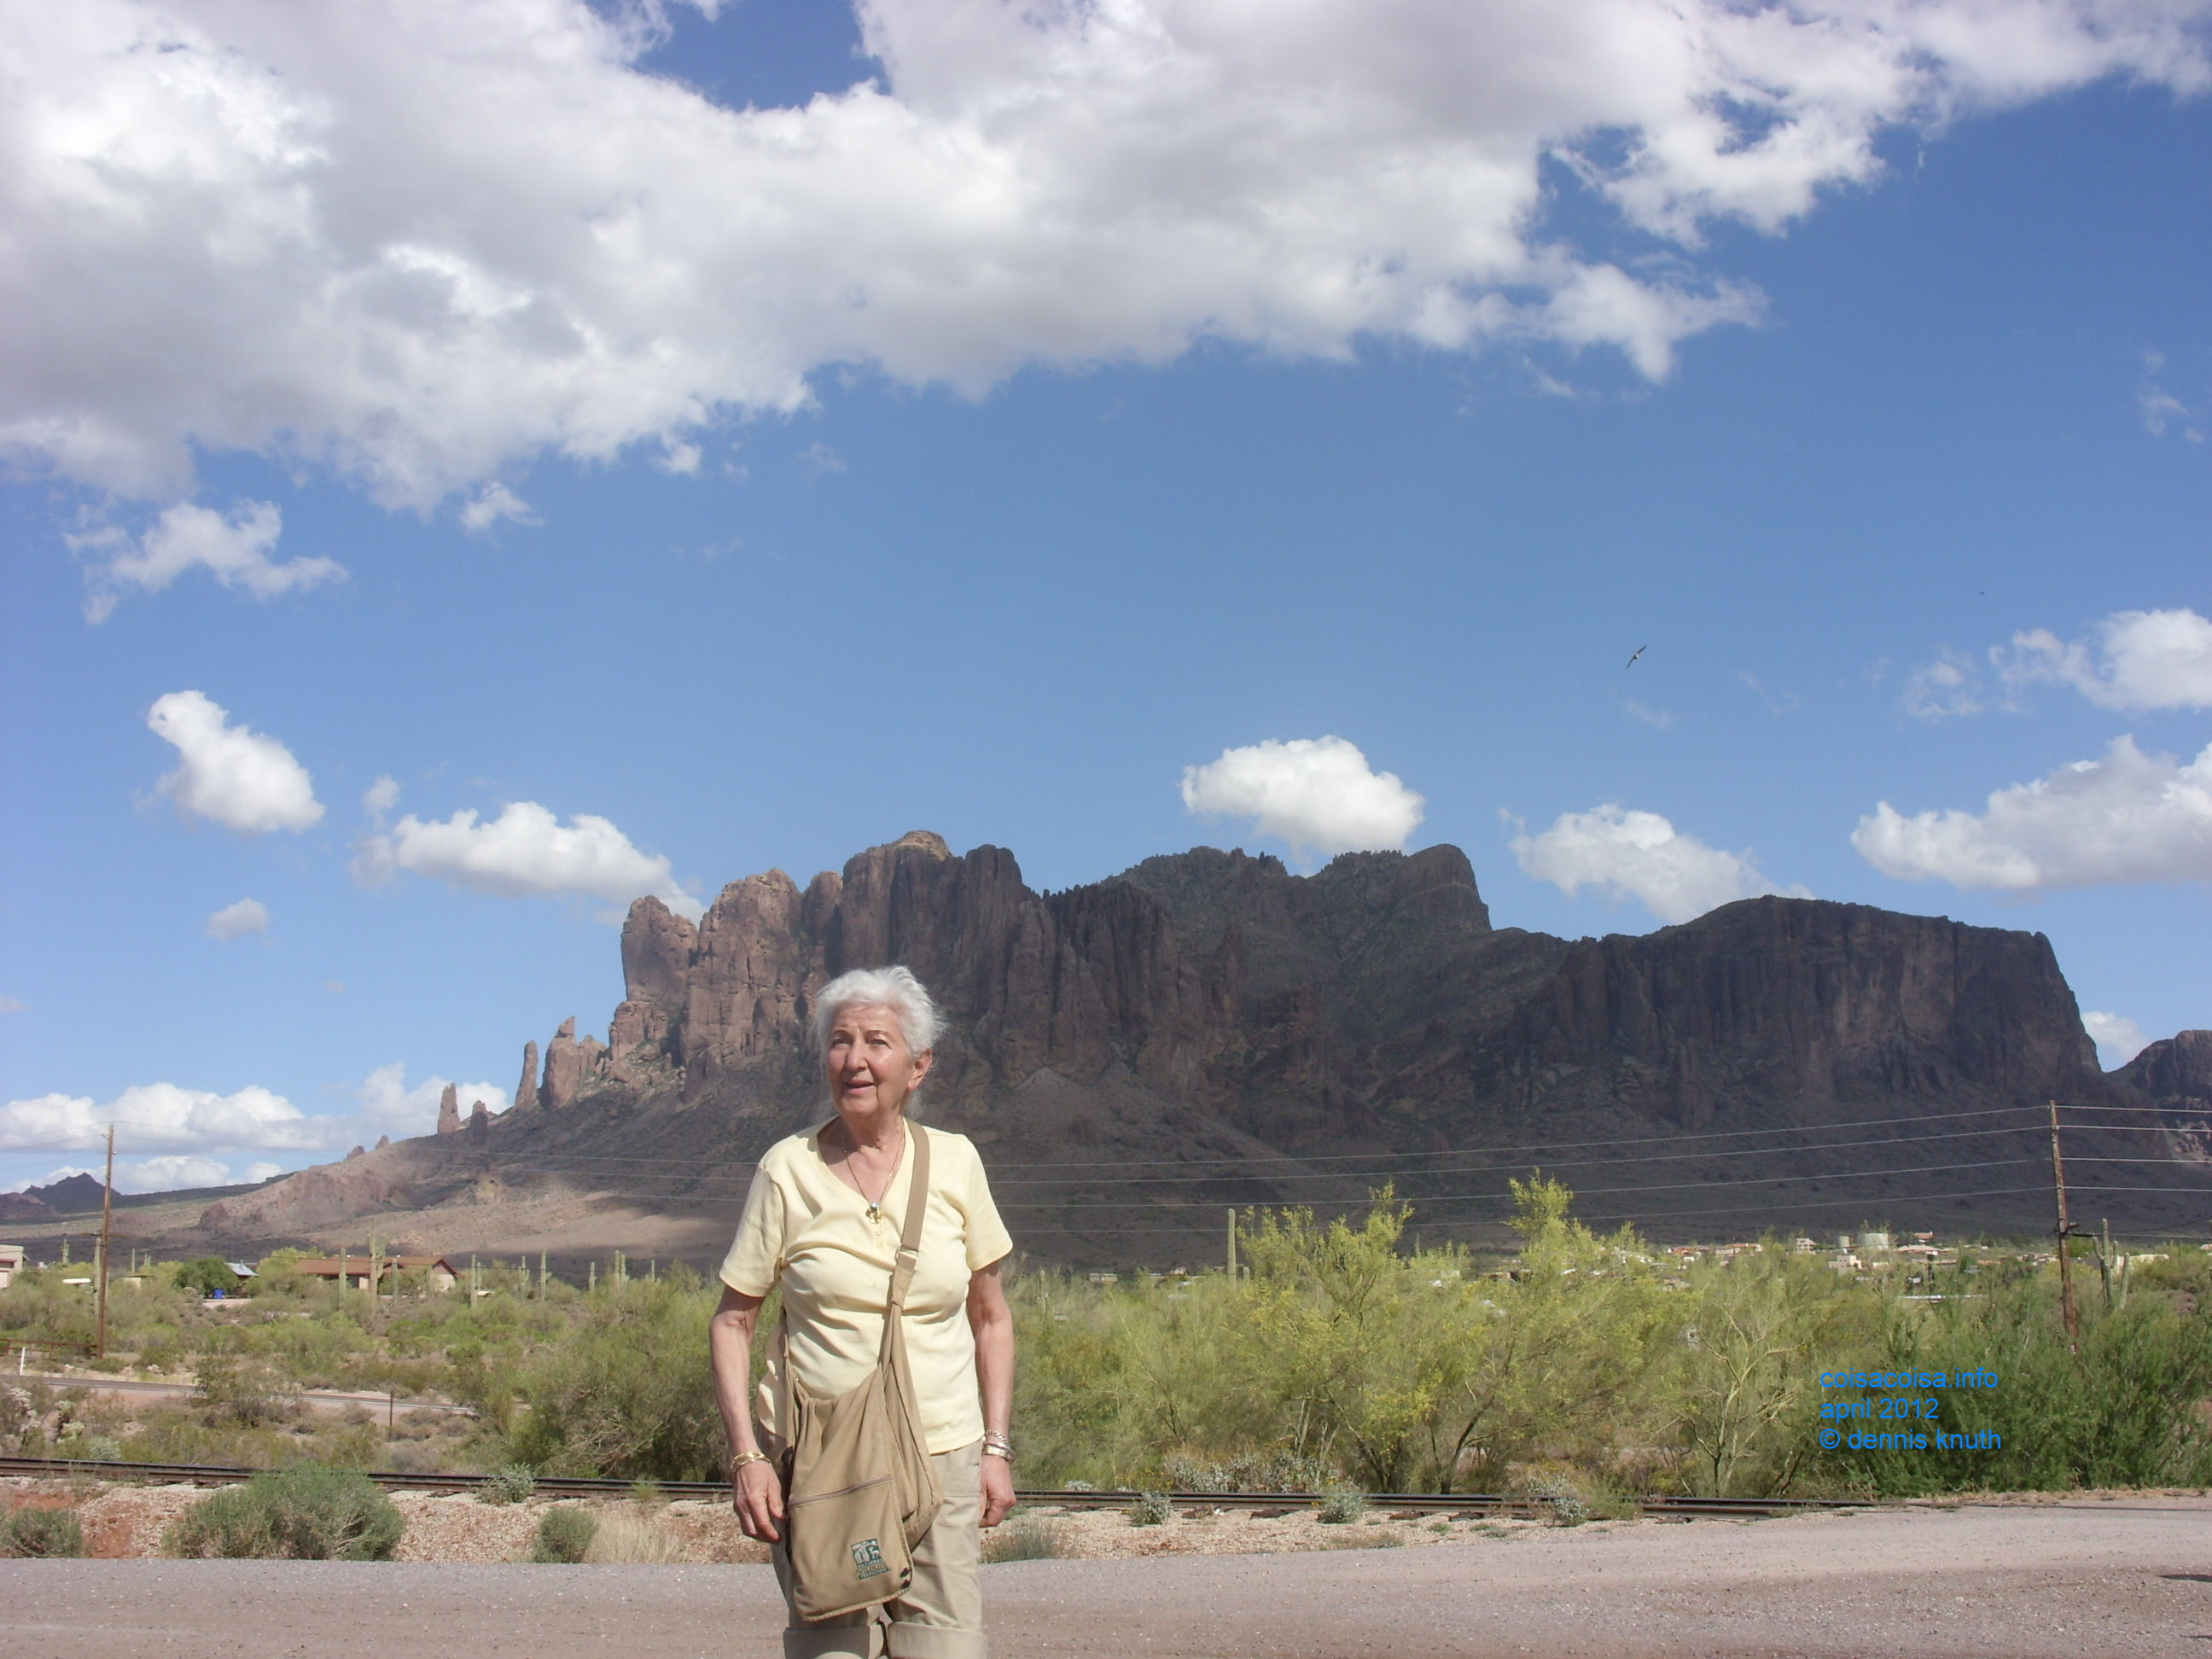 Stella out on the desert near Apache Junction